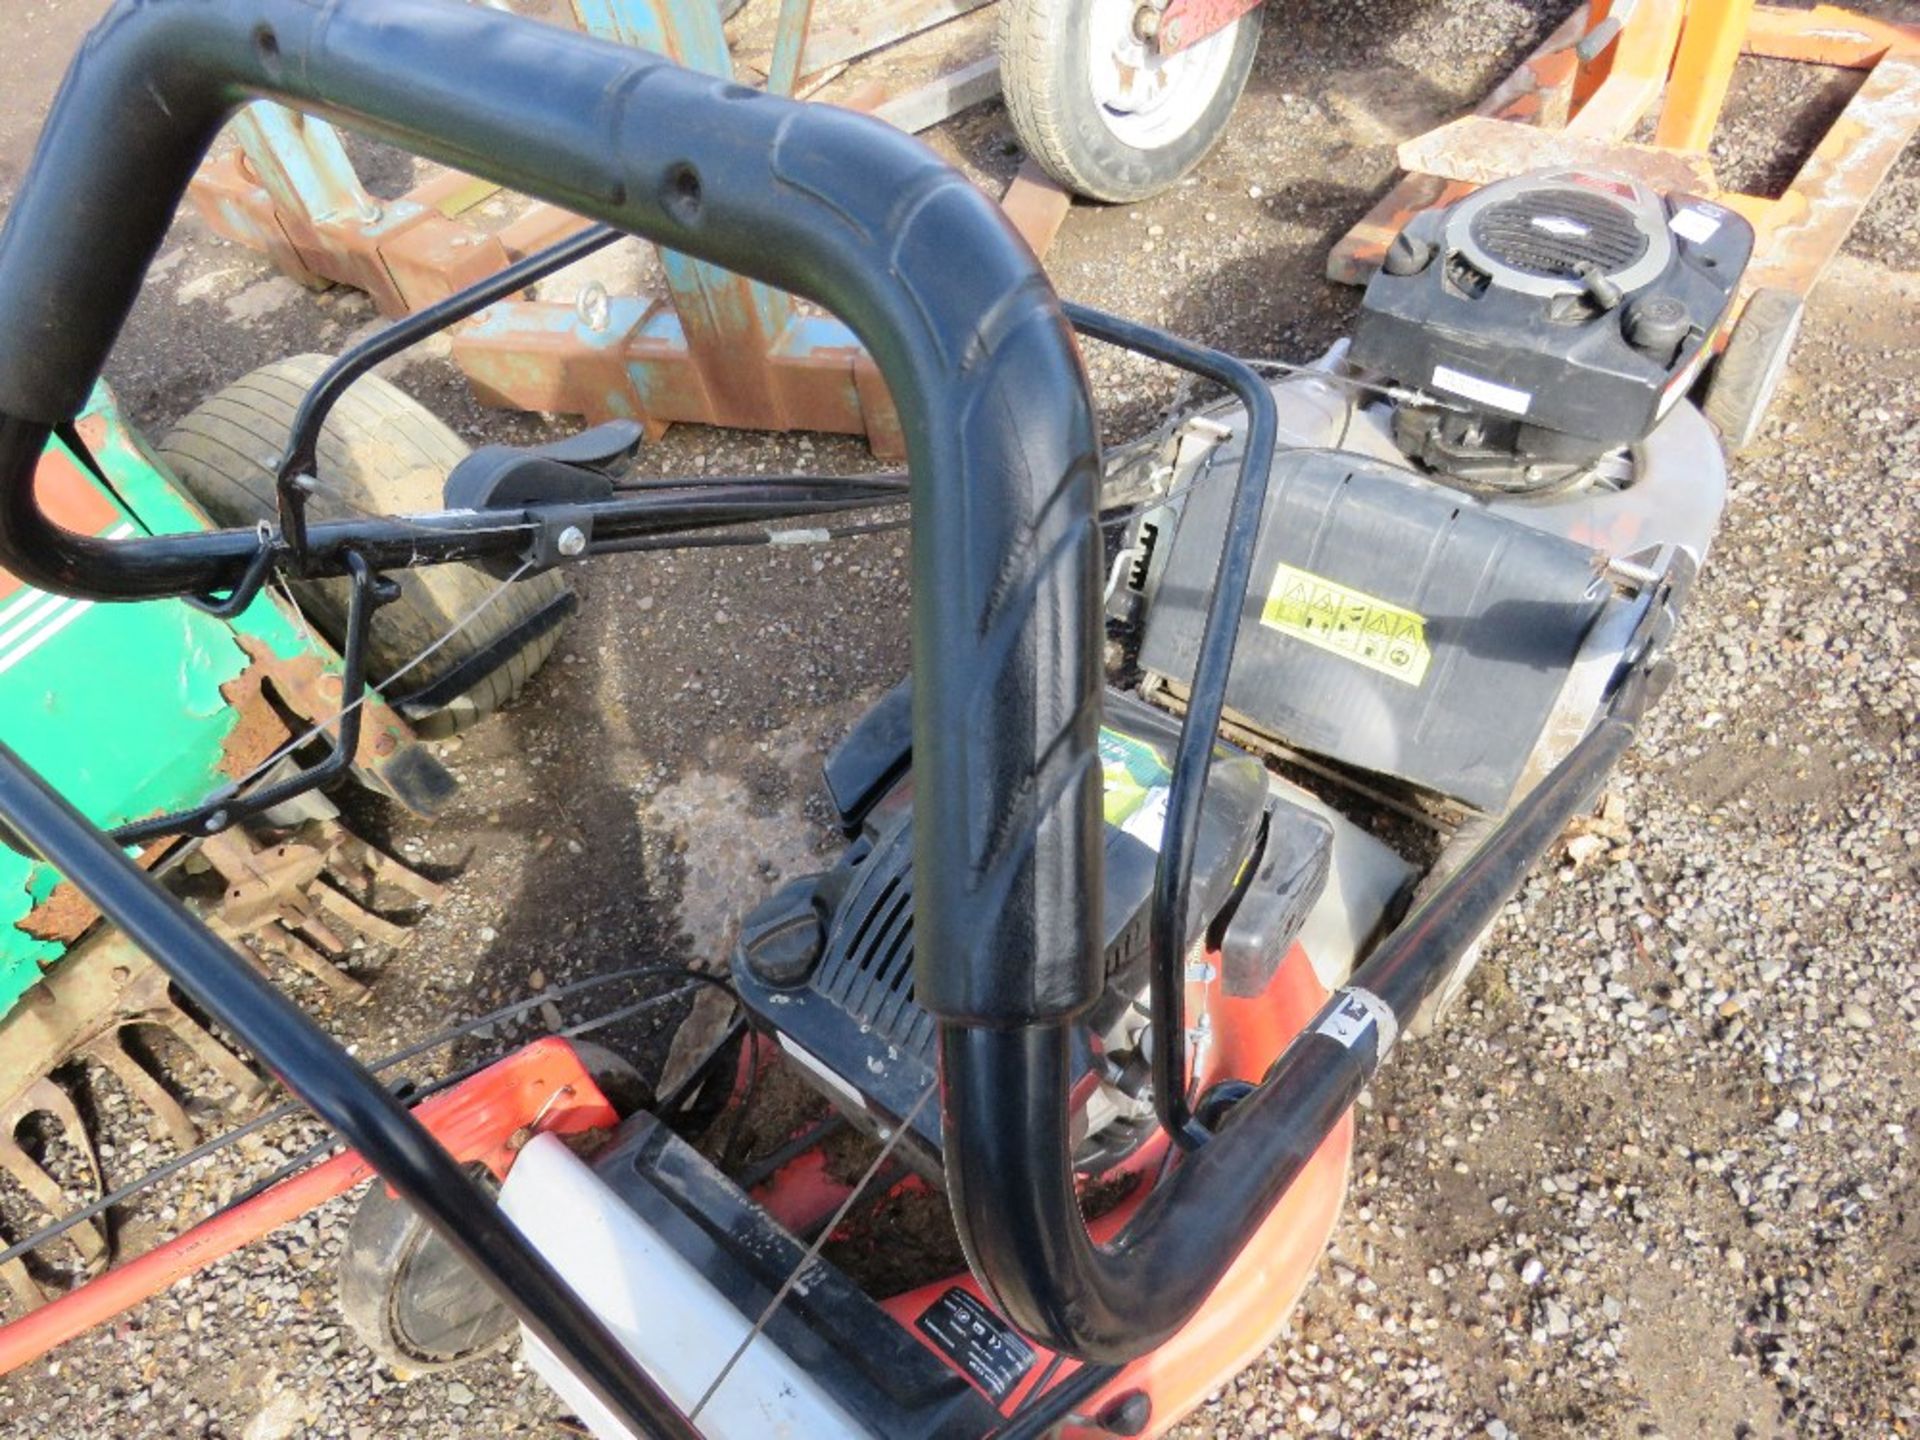 LAWNFLITE ROLLER PETROL ENGINED MOWER. NO VAT ON THE HAMMER PRICE OF THIS ITEM. - Image 3 of 3